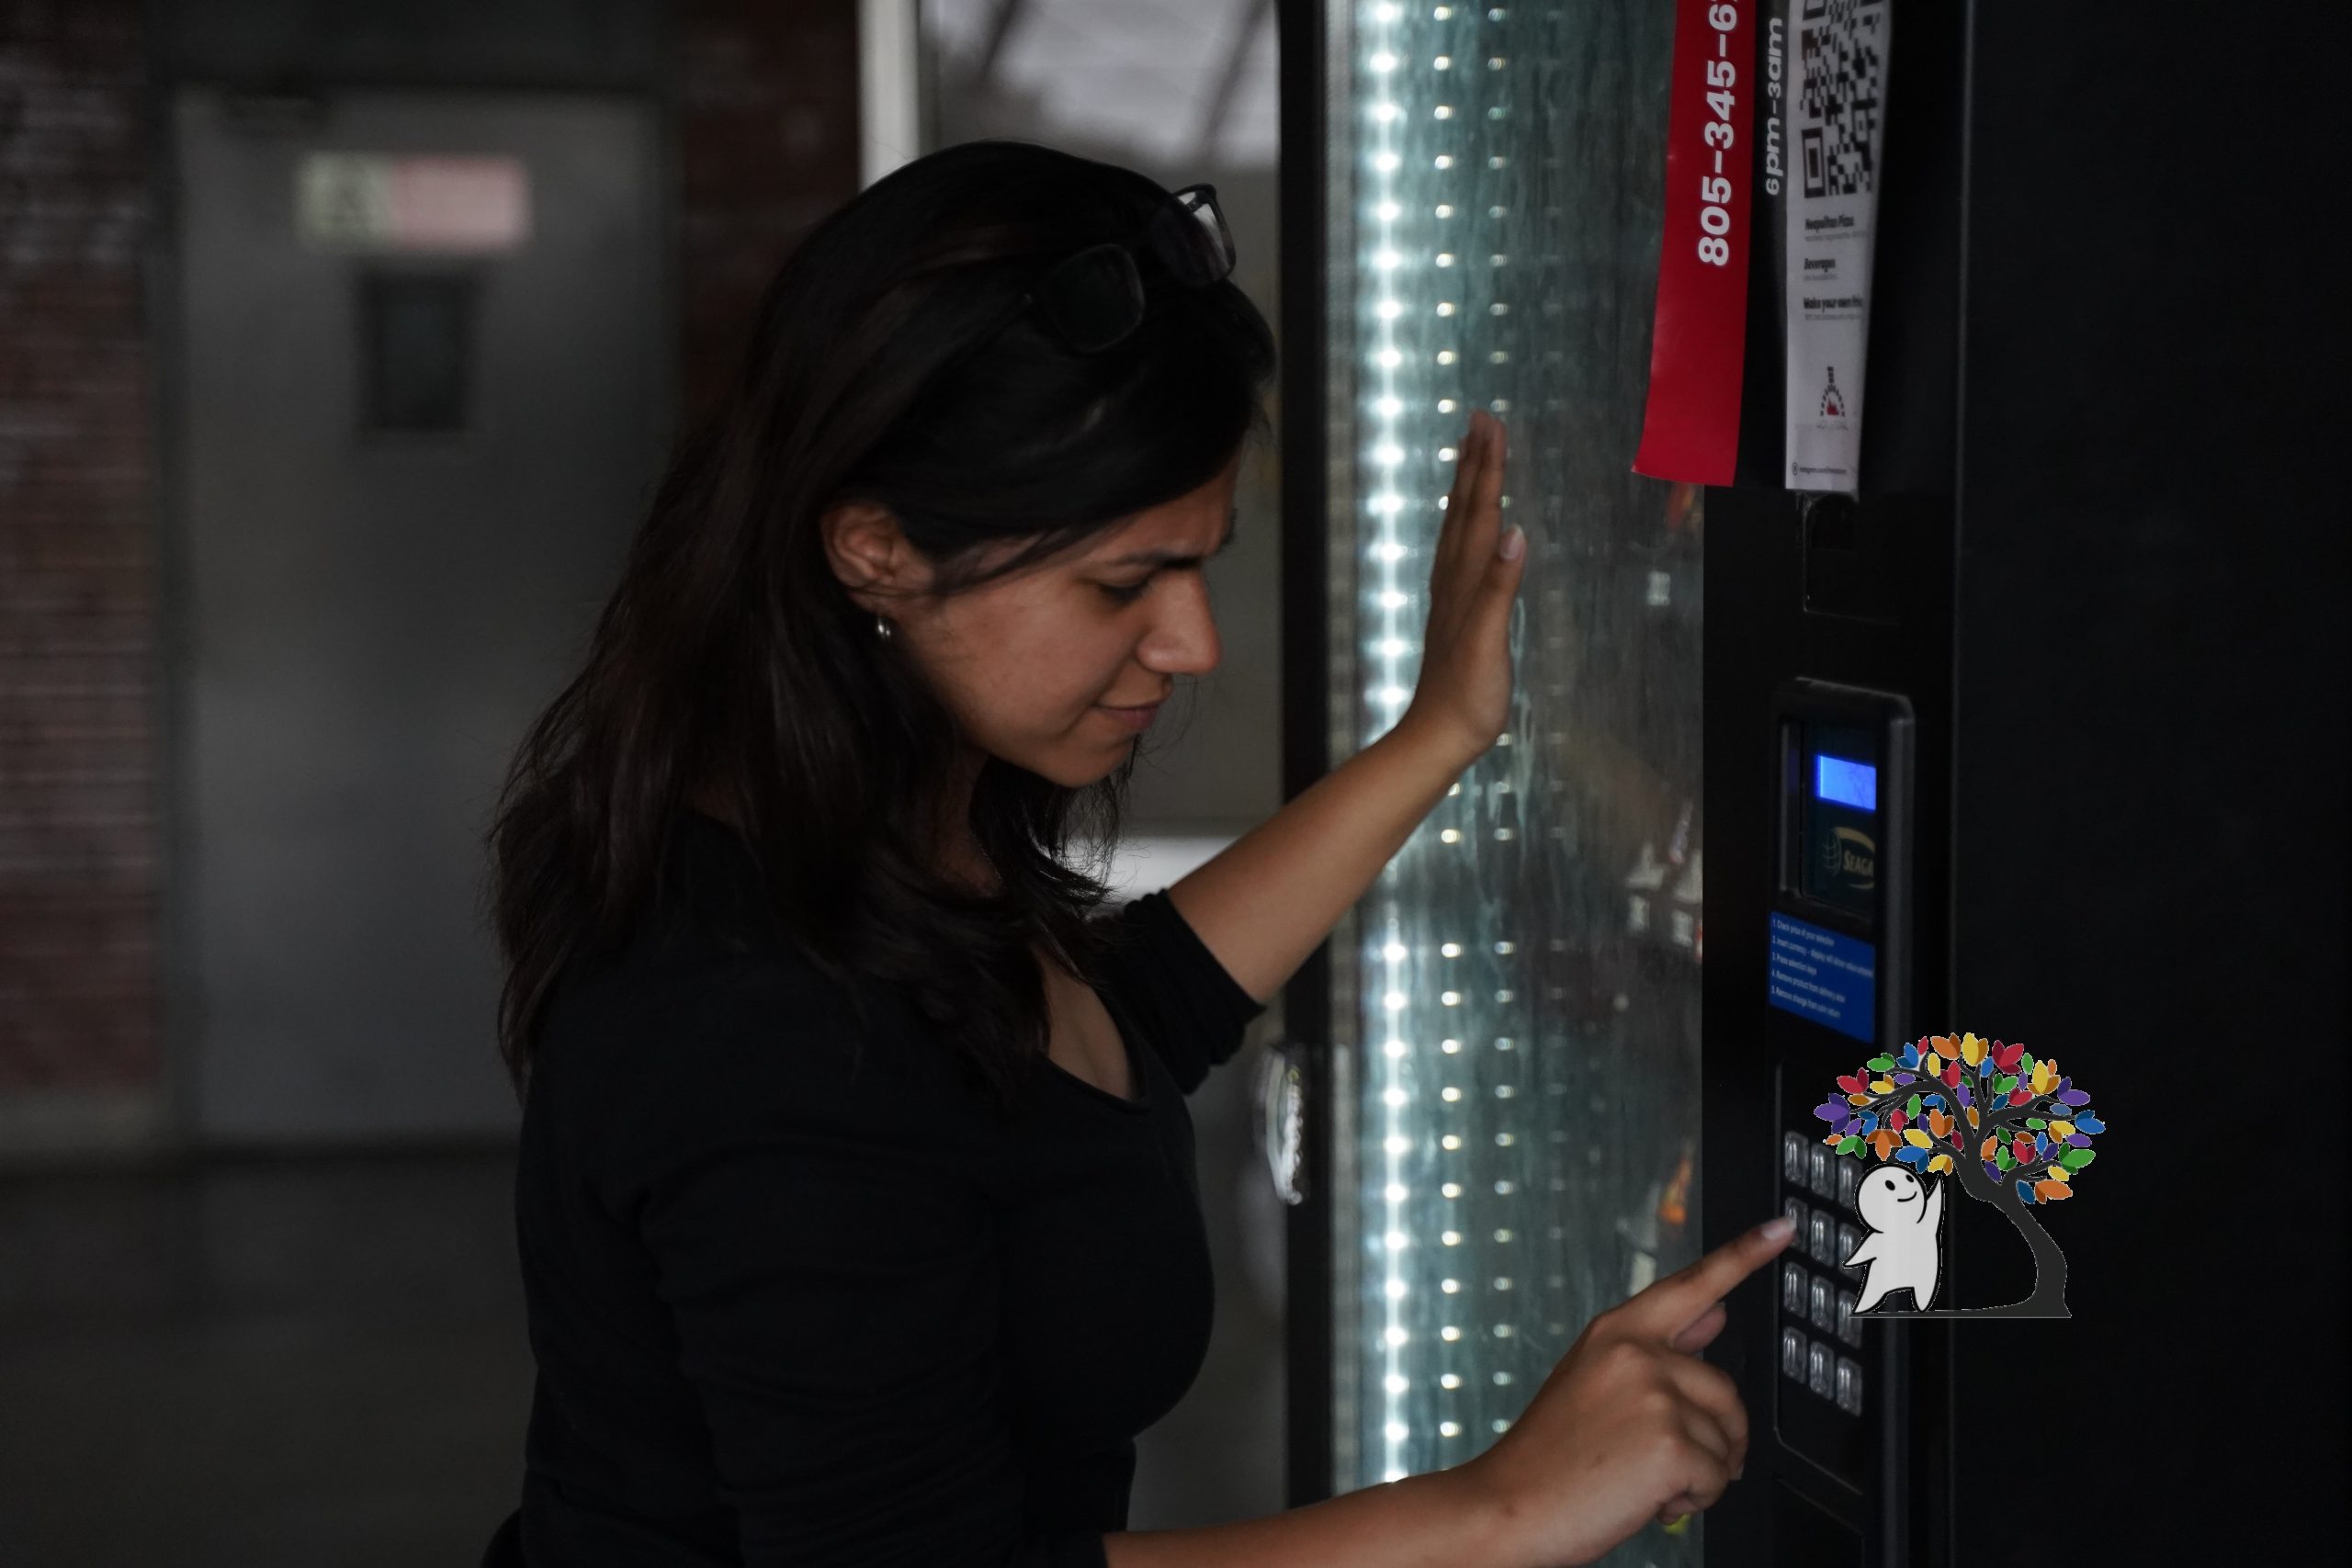 Woman Being Impatient at the Vending Machine